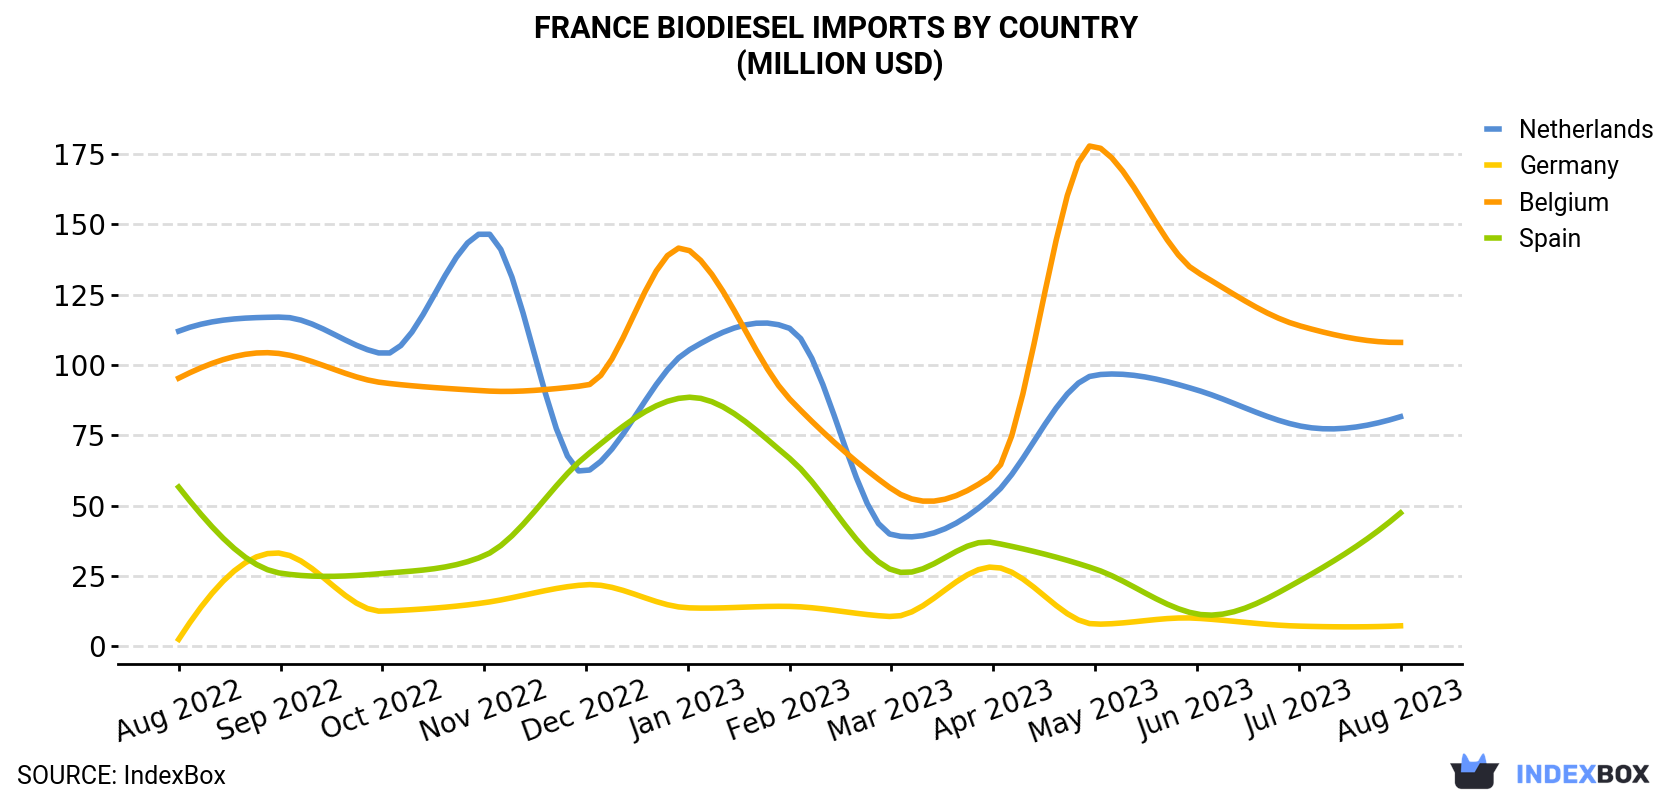 France Biodiesel Imports By Country (Million USD)